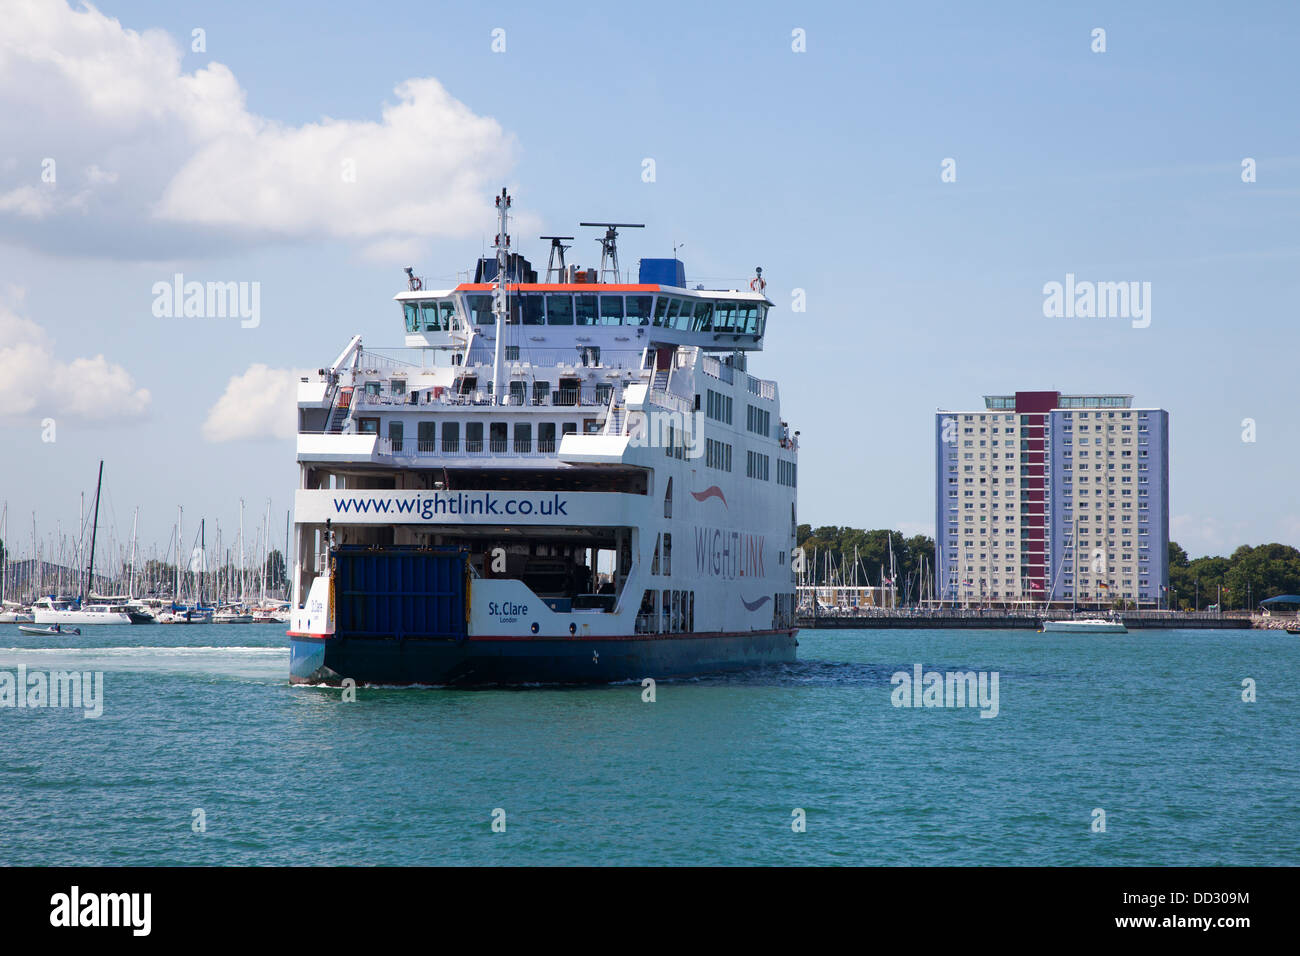 Wightlink roro ferry approaching Portsmouth, Hampshire, England Stock Photo